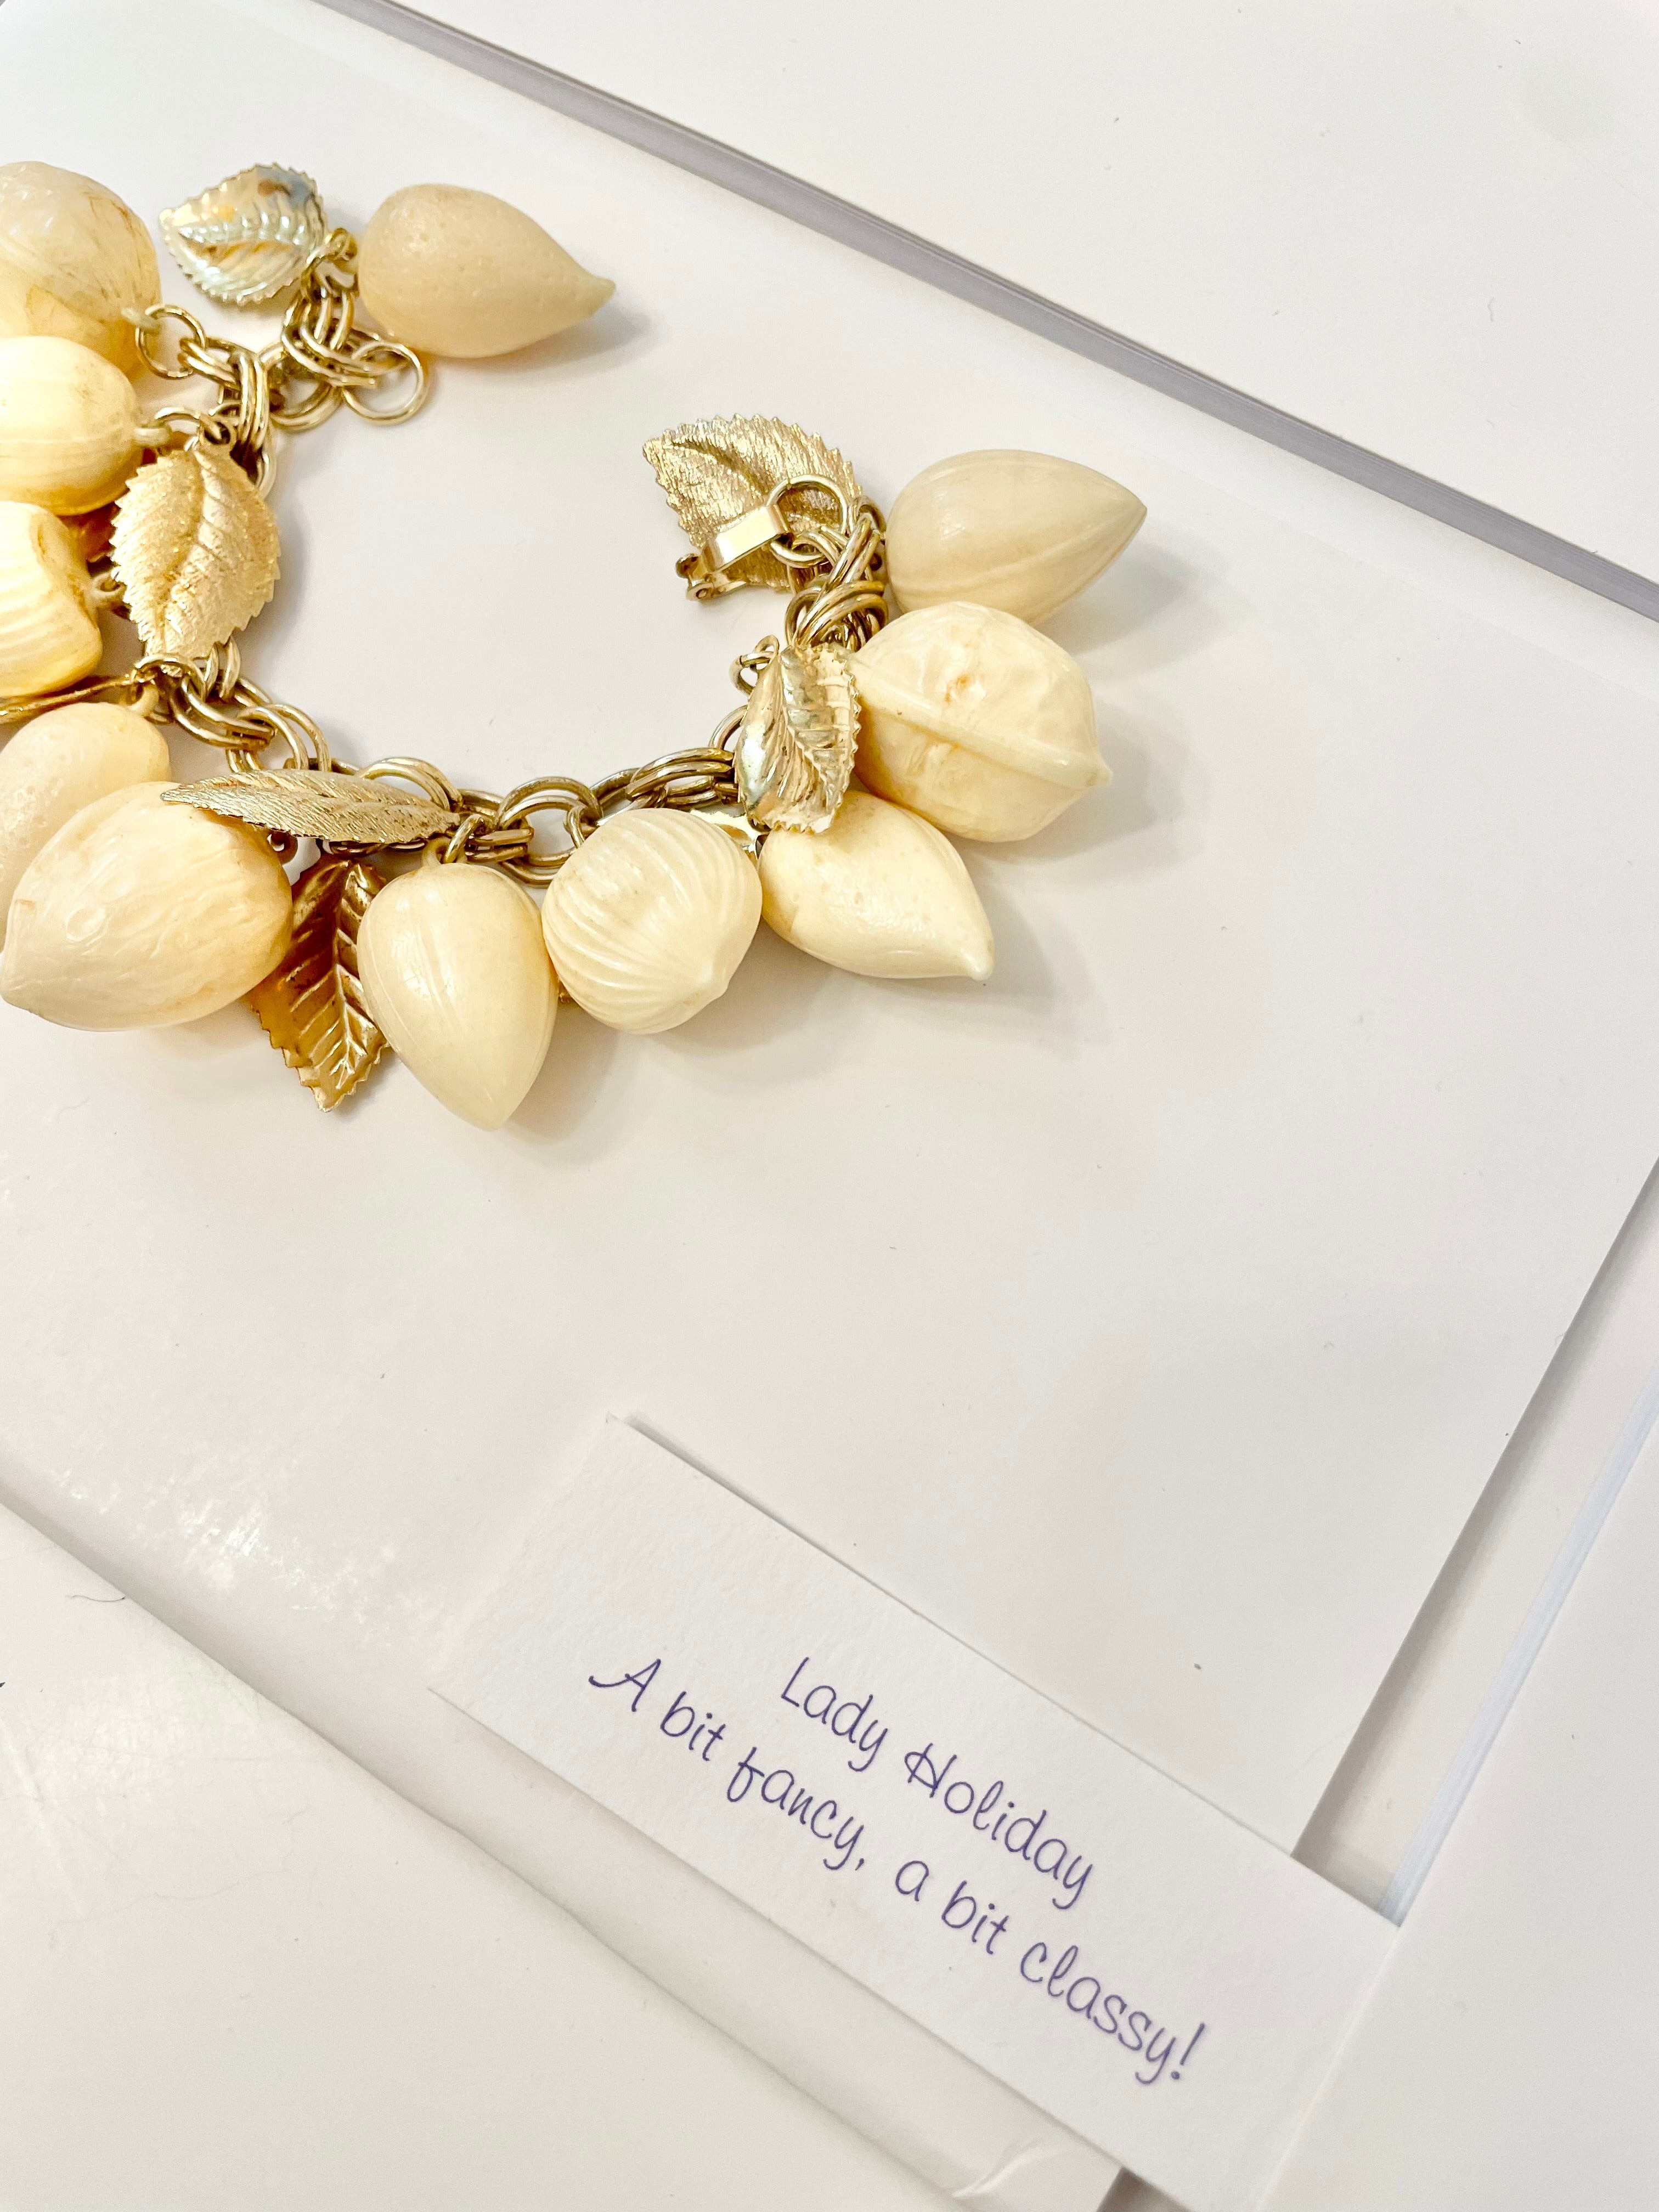 The most charming ivory resin charm bracelet that there was.... so cheeky!